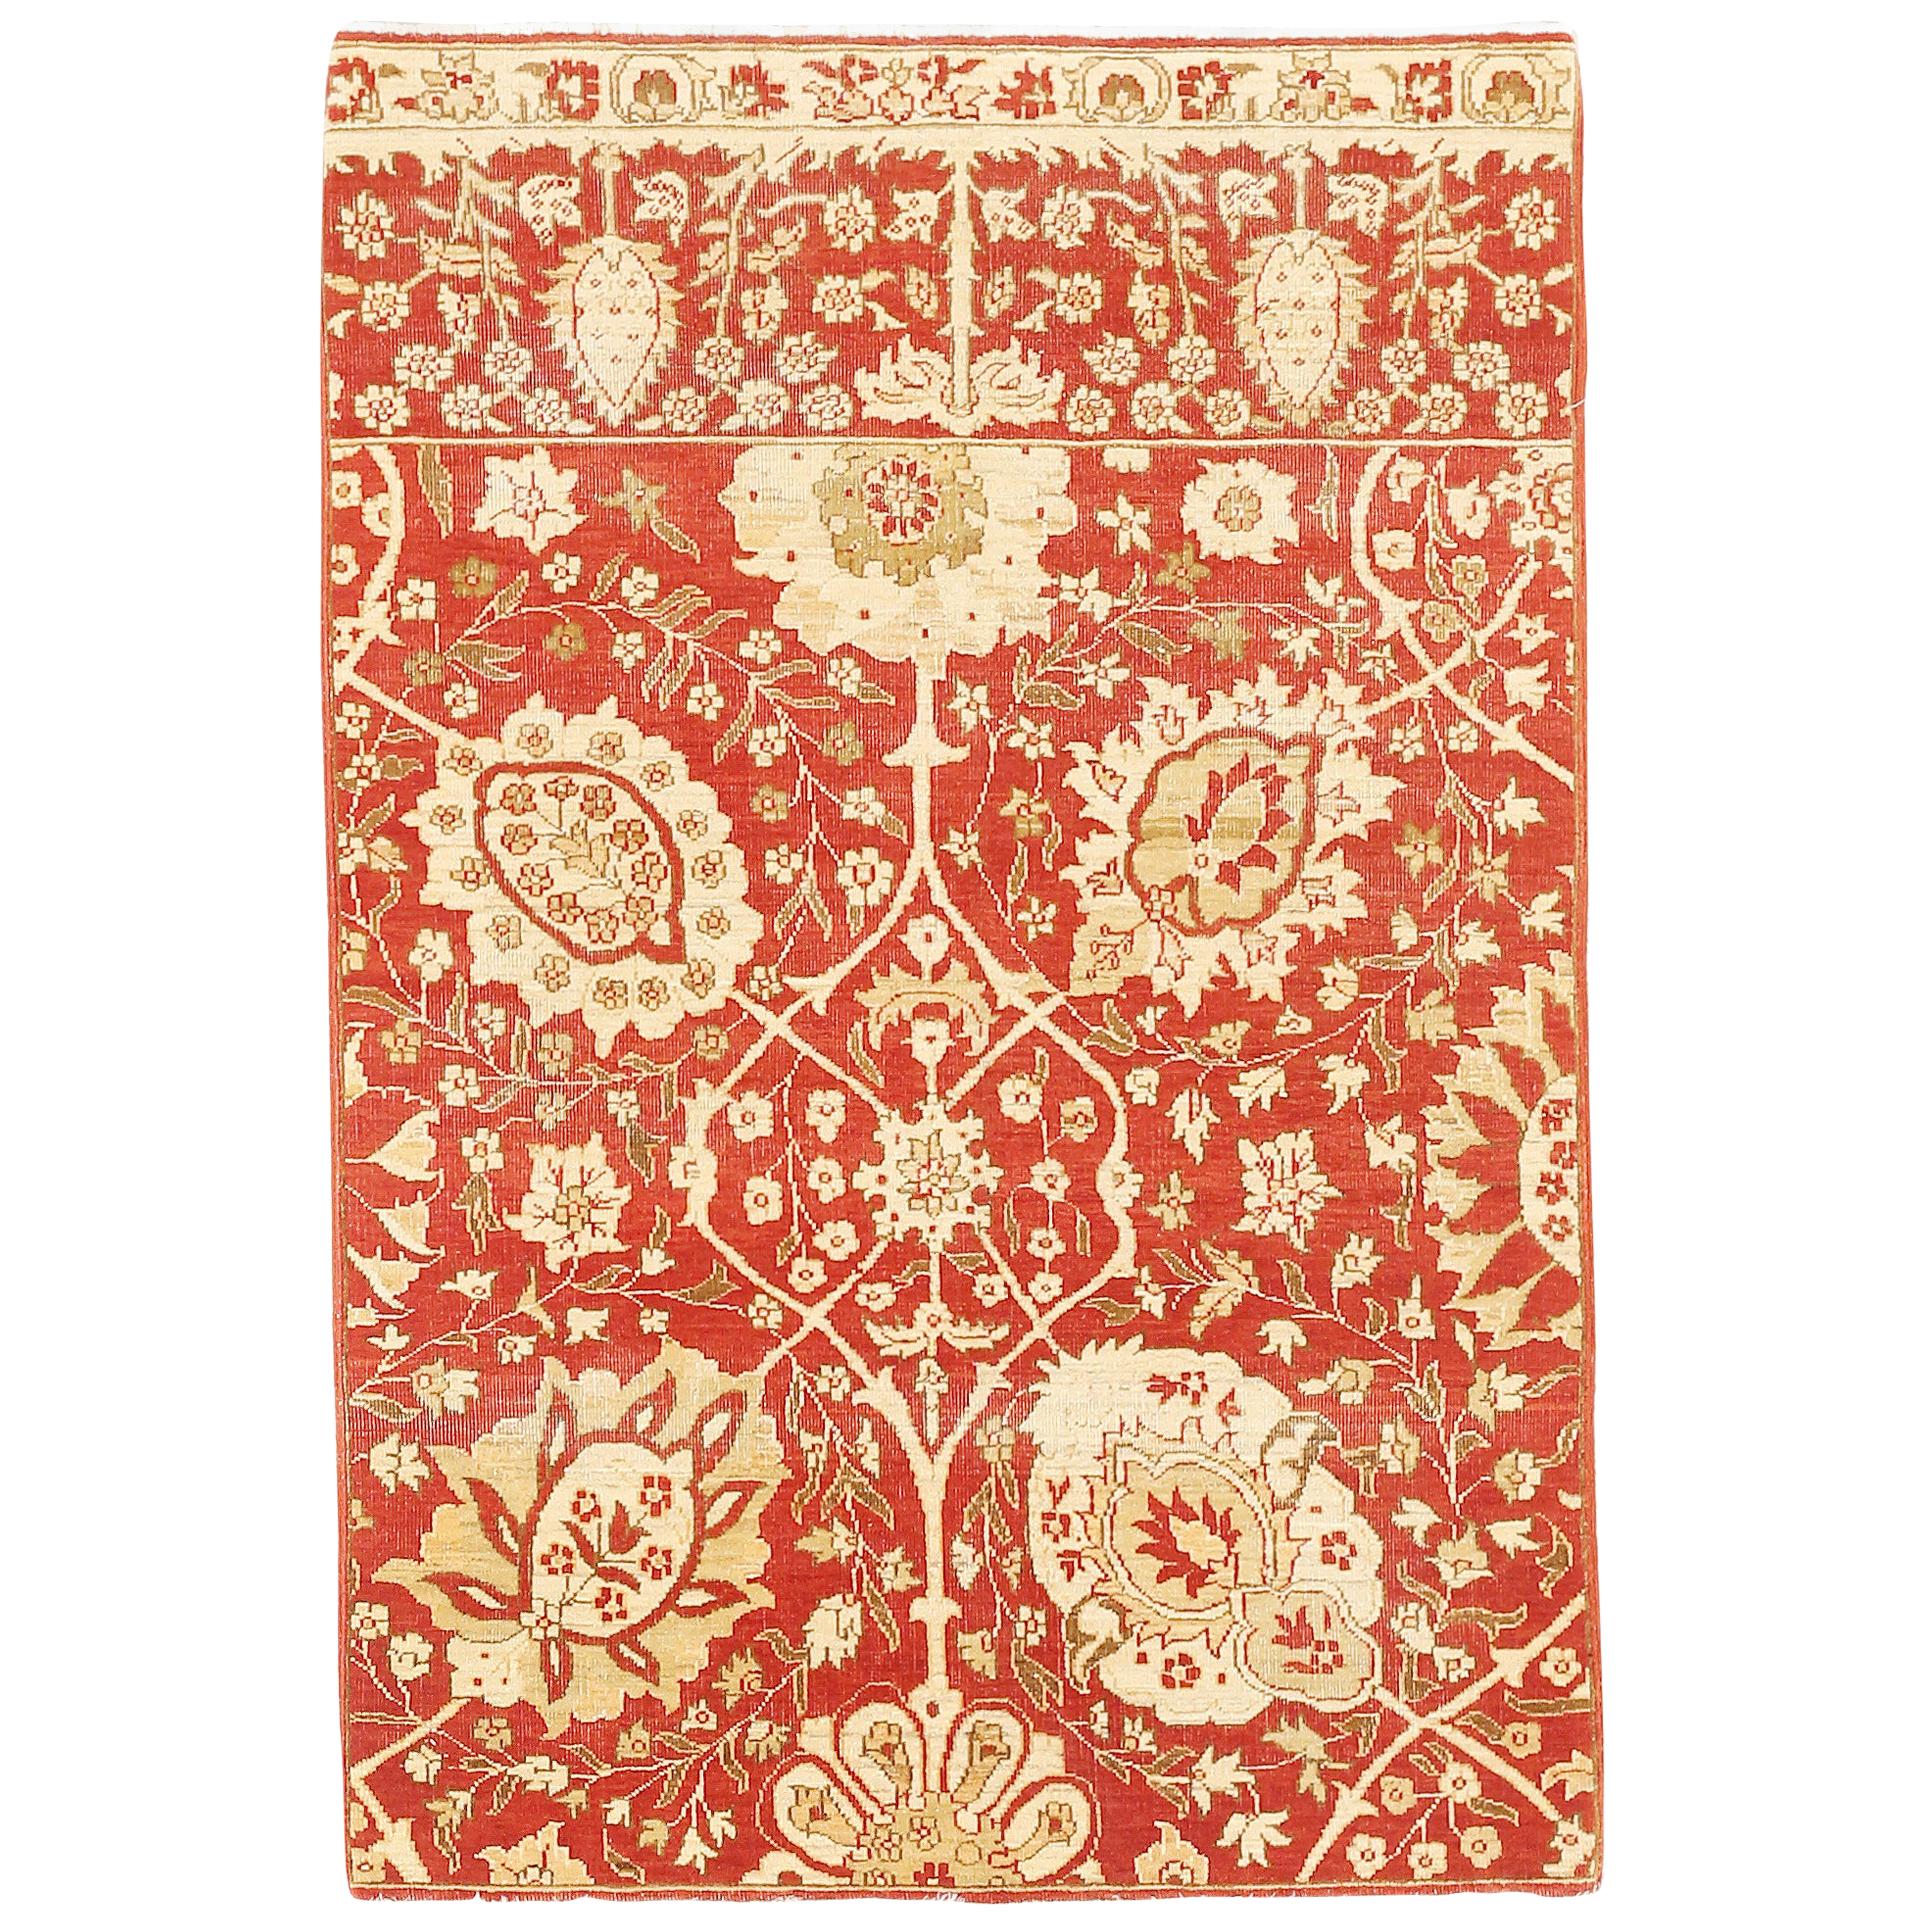 New Tabriz Rug with Beige and Ivory Flower Motifs on Red Field